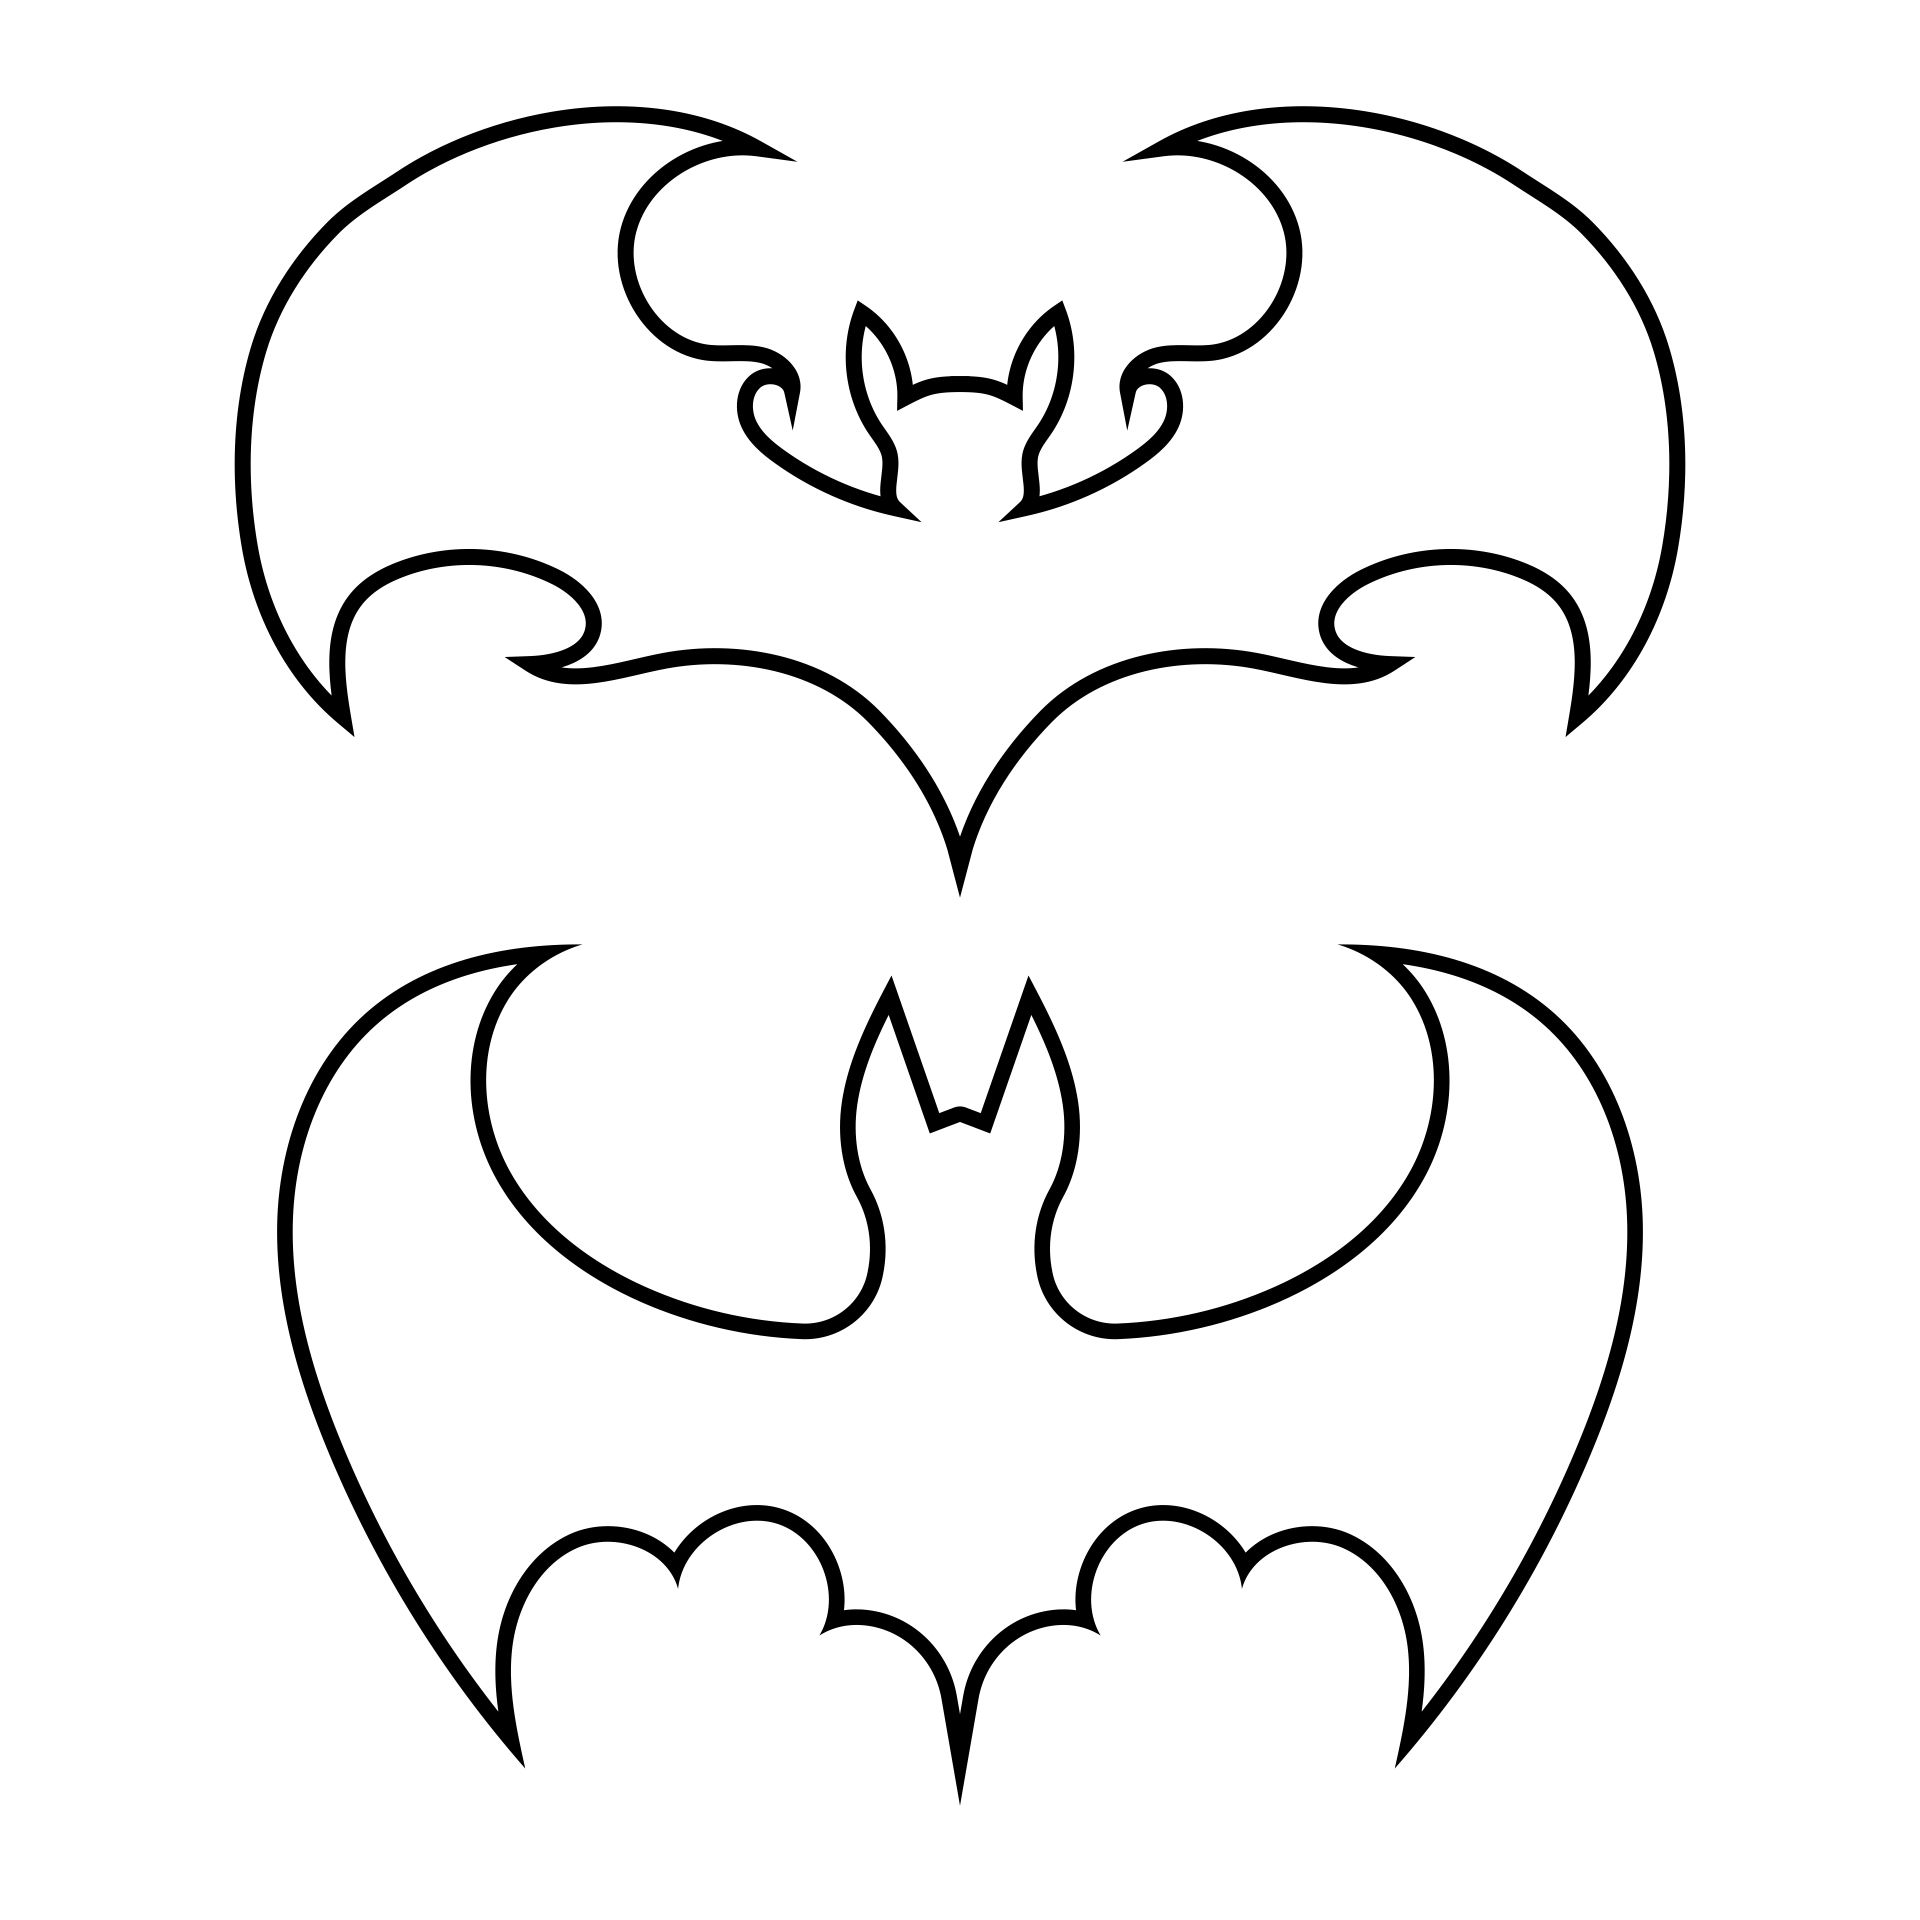 Halloween Bat Patterns for Tracing